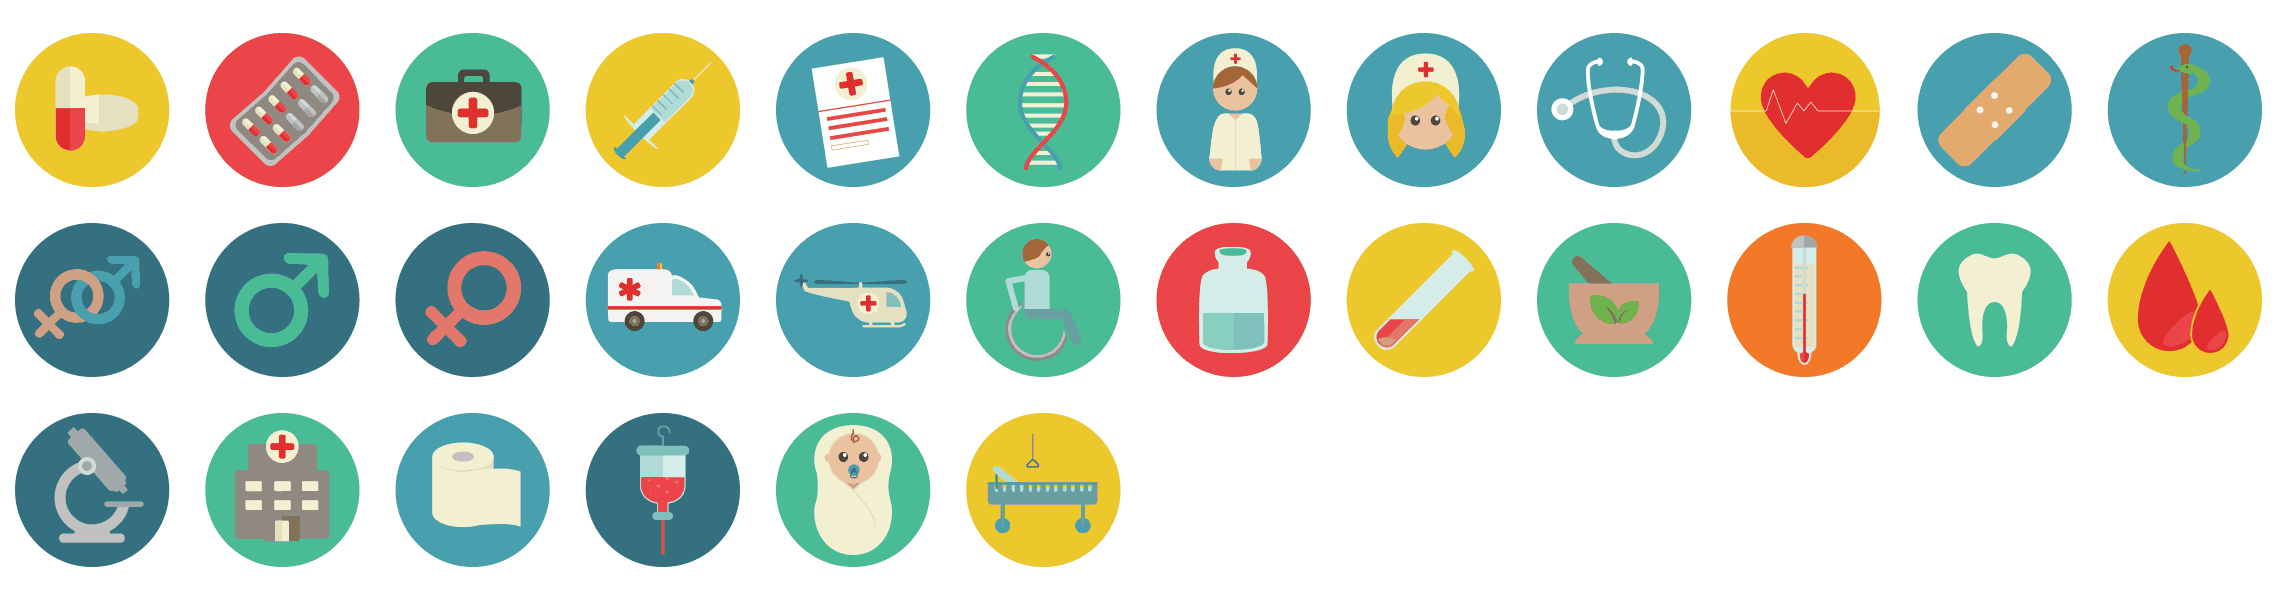 medical-flat-icons-vol-1-preview